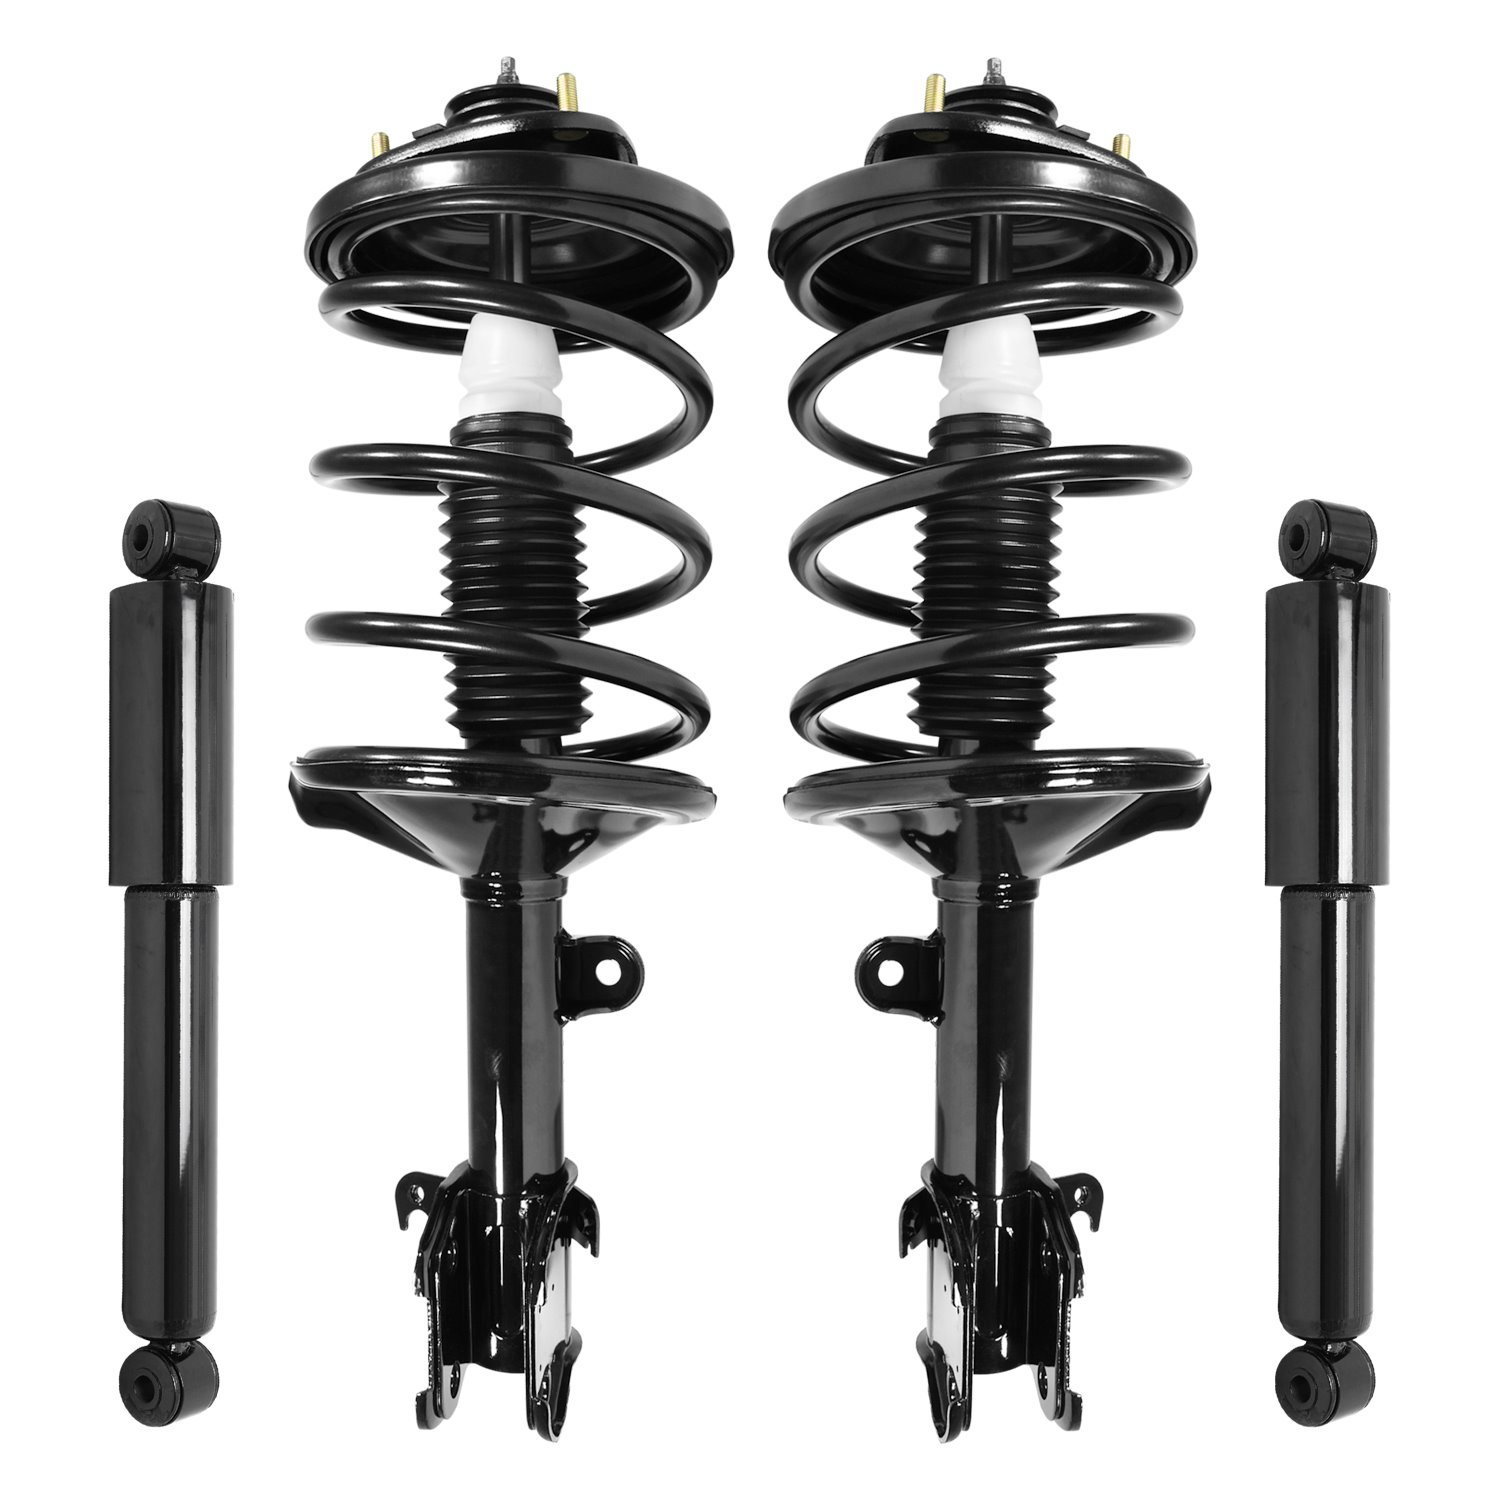 4-11661-250020-001 Front & Rear Suspension Strut & Coil Spring Assembly Fits Select Honda Odyssey